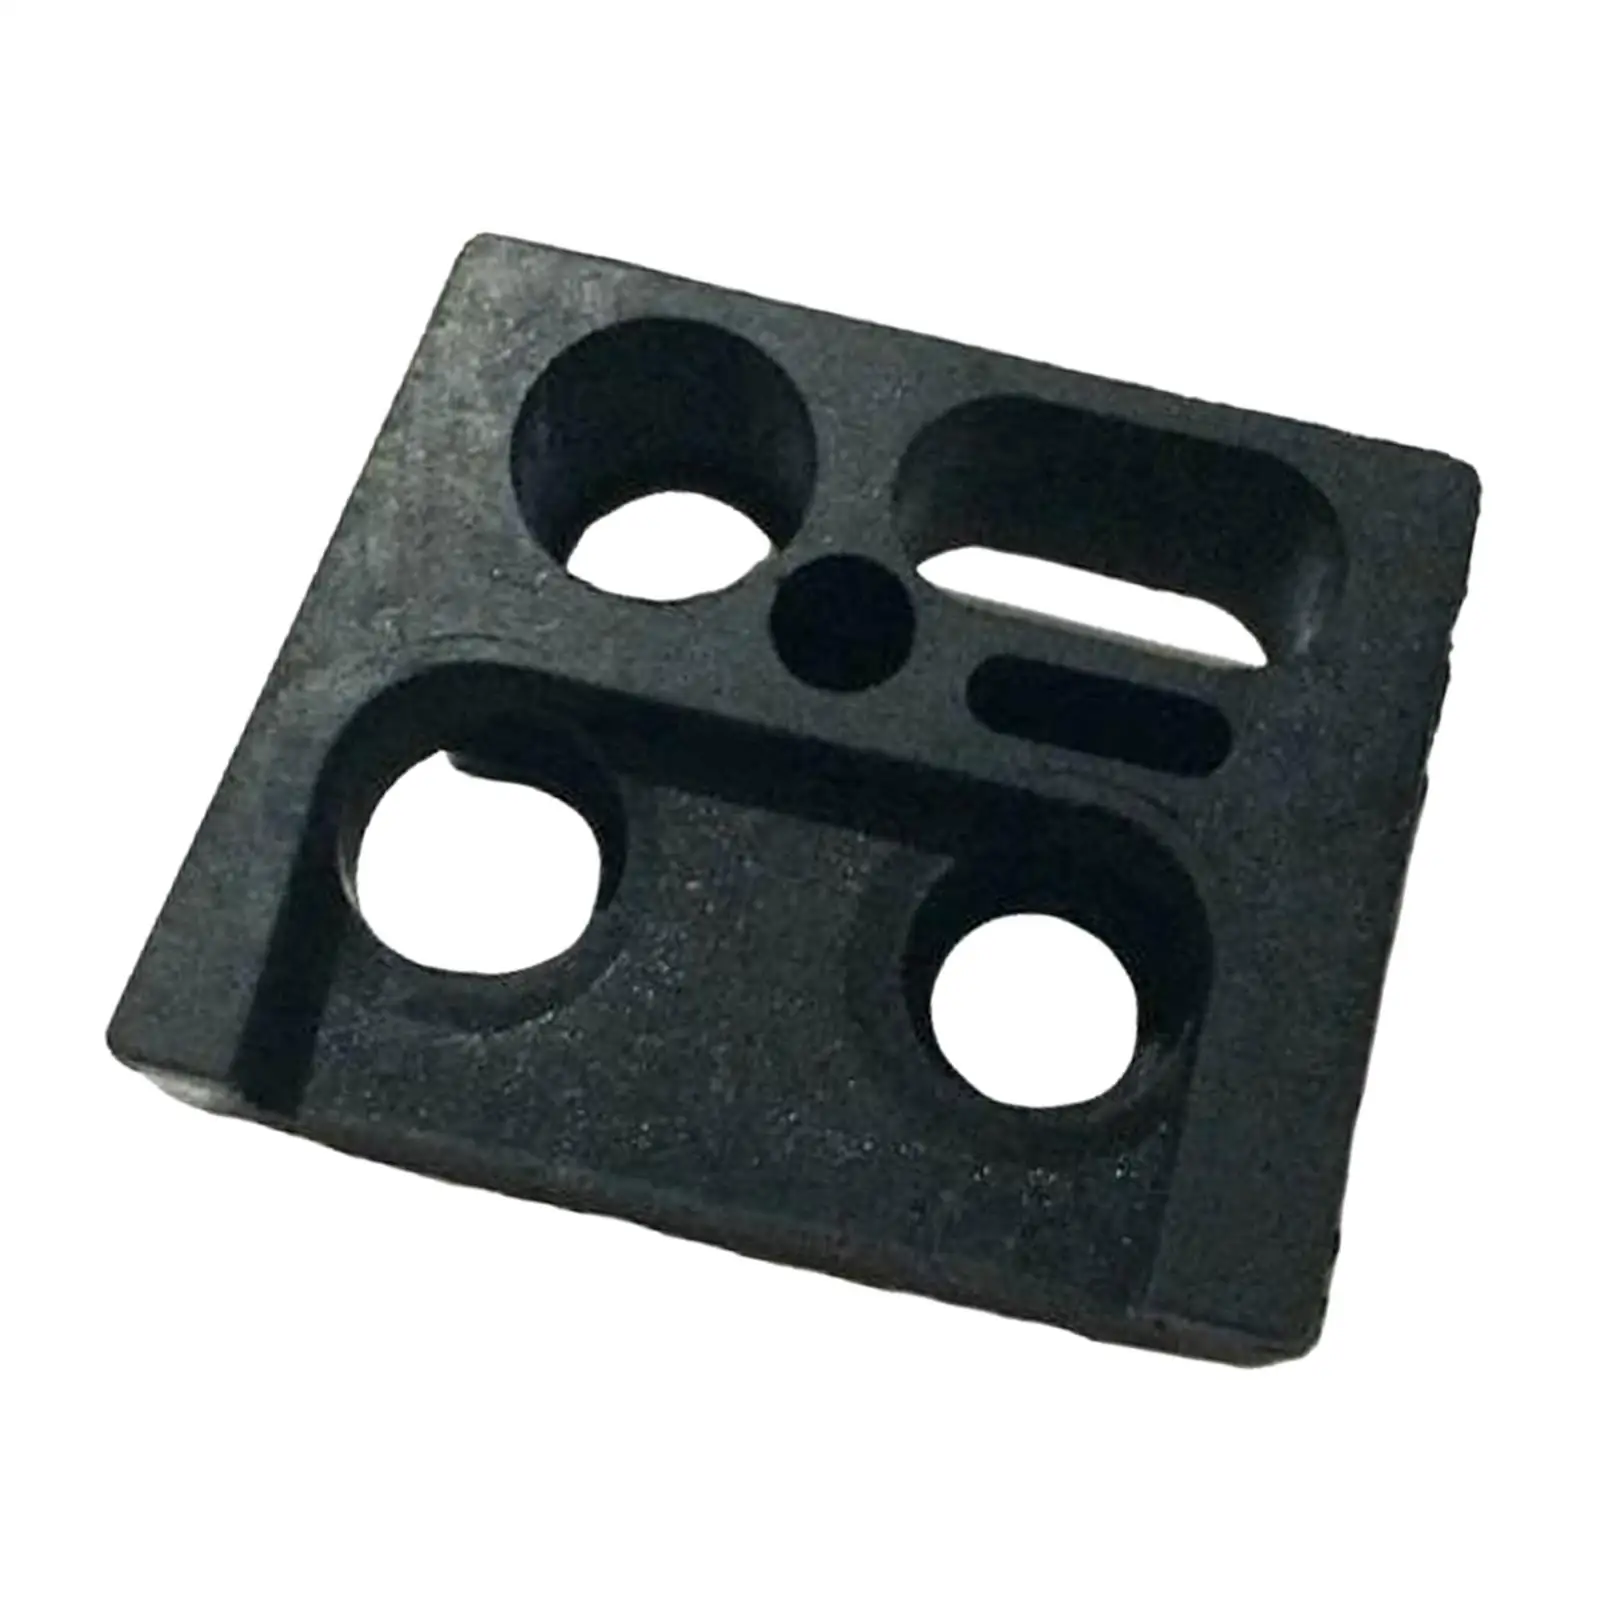 66T-42725 Spare Parts Assembly Repair Parts Durable Replacement Rubber Grommet Accessories Easy to Install for Yamaha